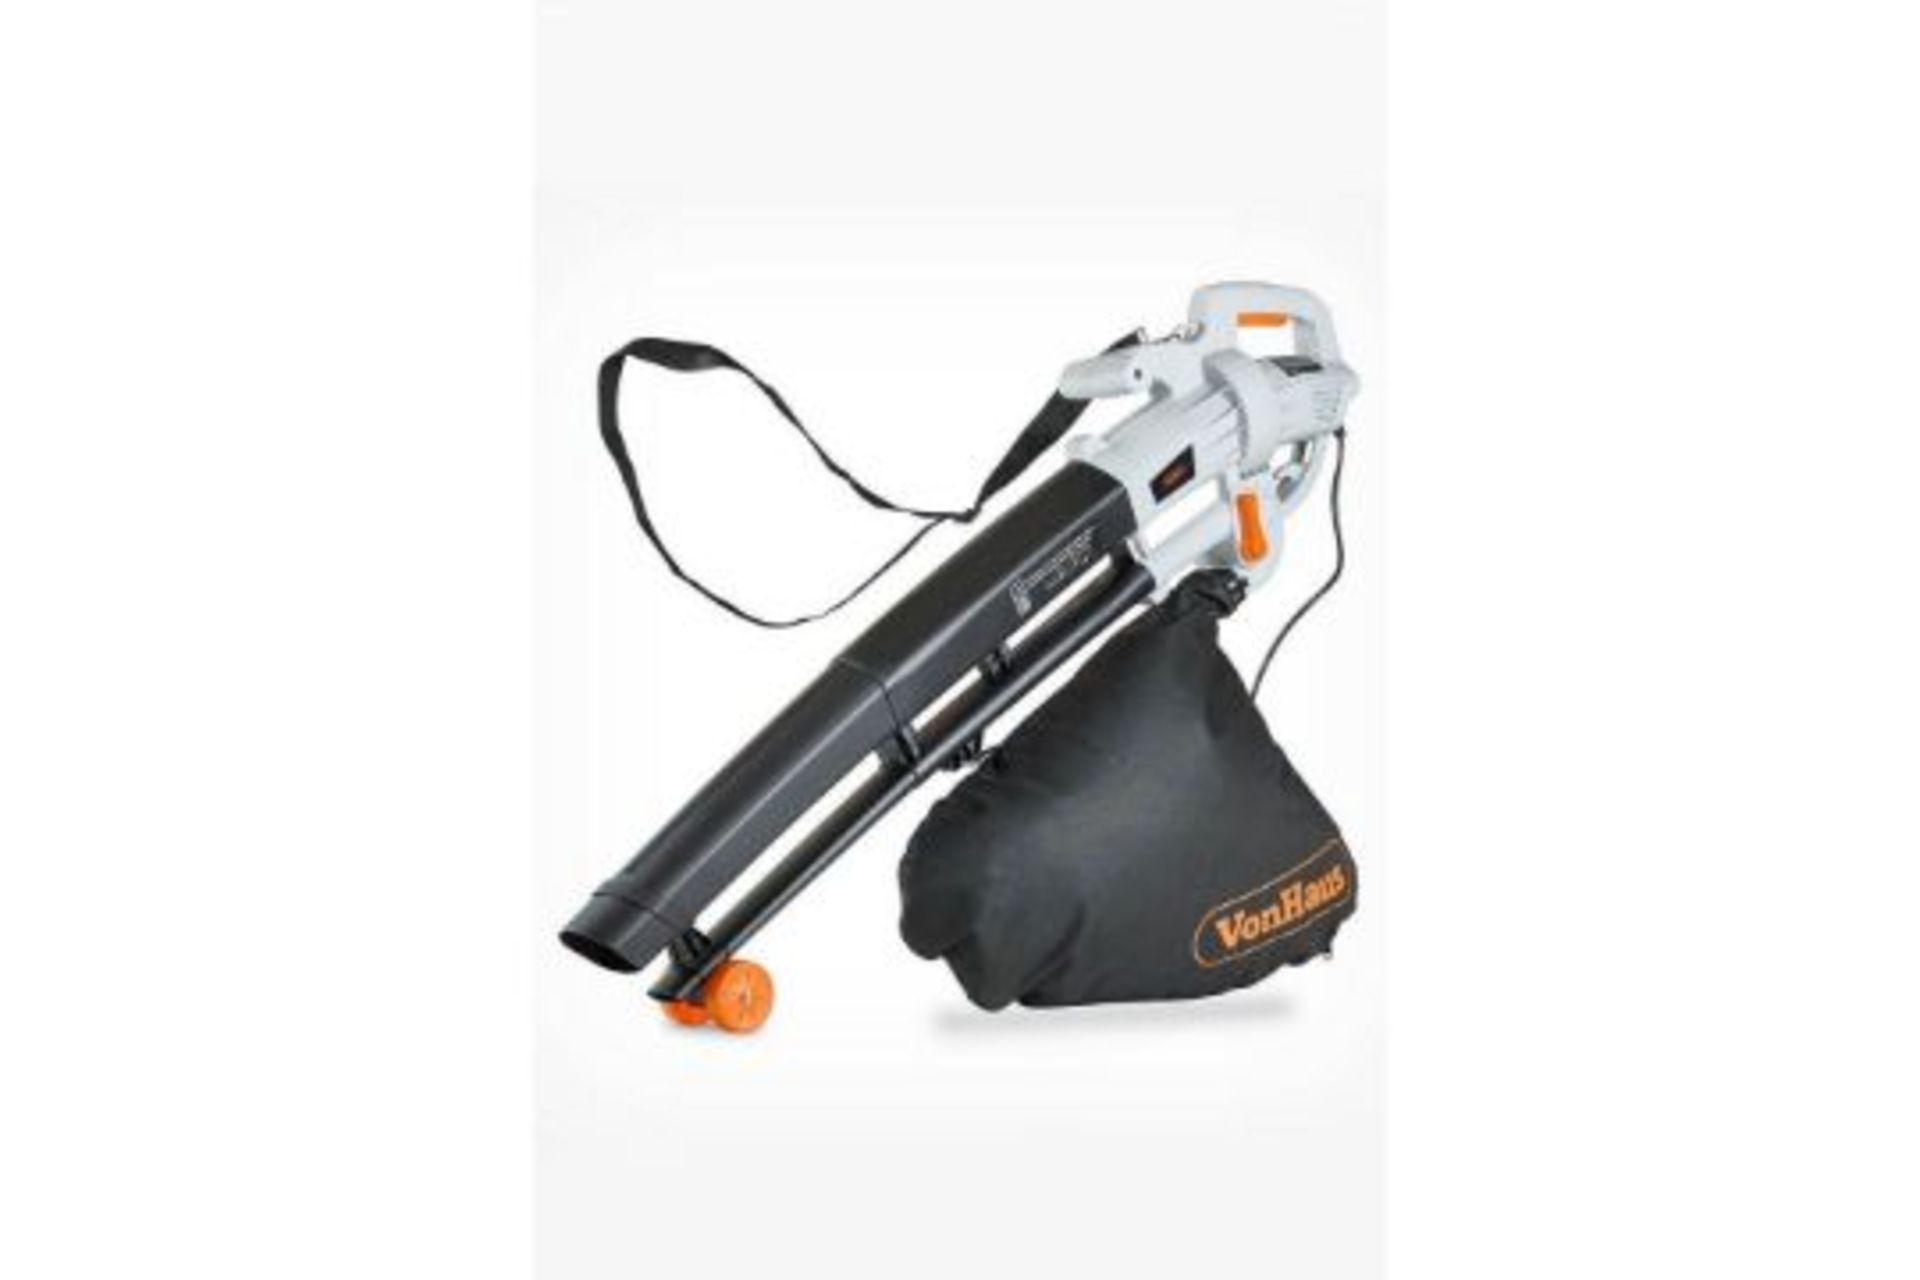 Trade lot 5 x Leaf Blower with Vacuum & Mulcher. - ER52. Remove leaves with ease from your patio,